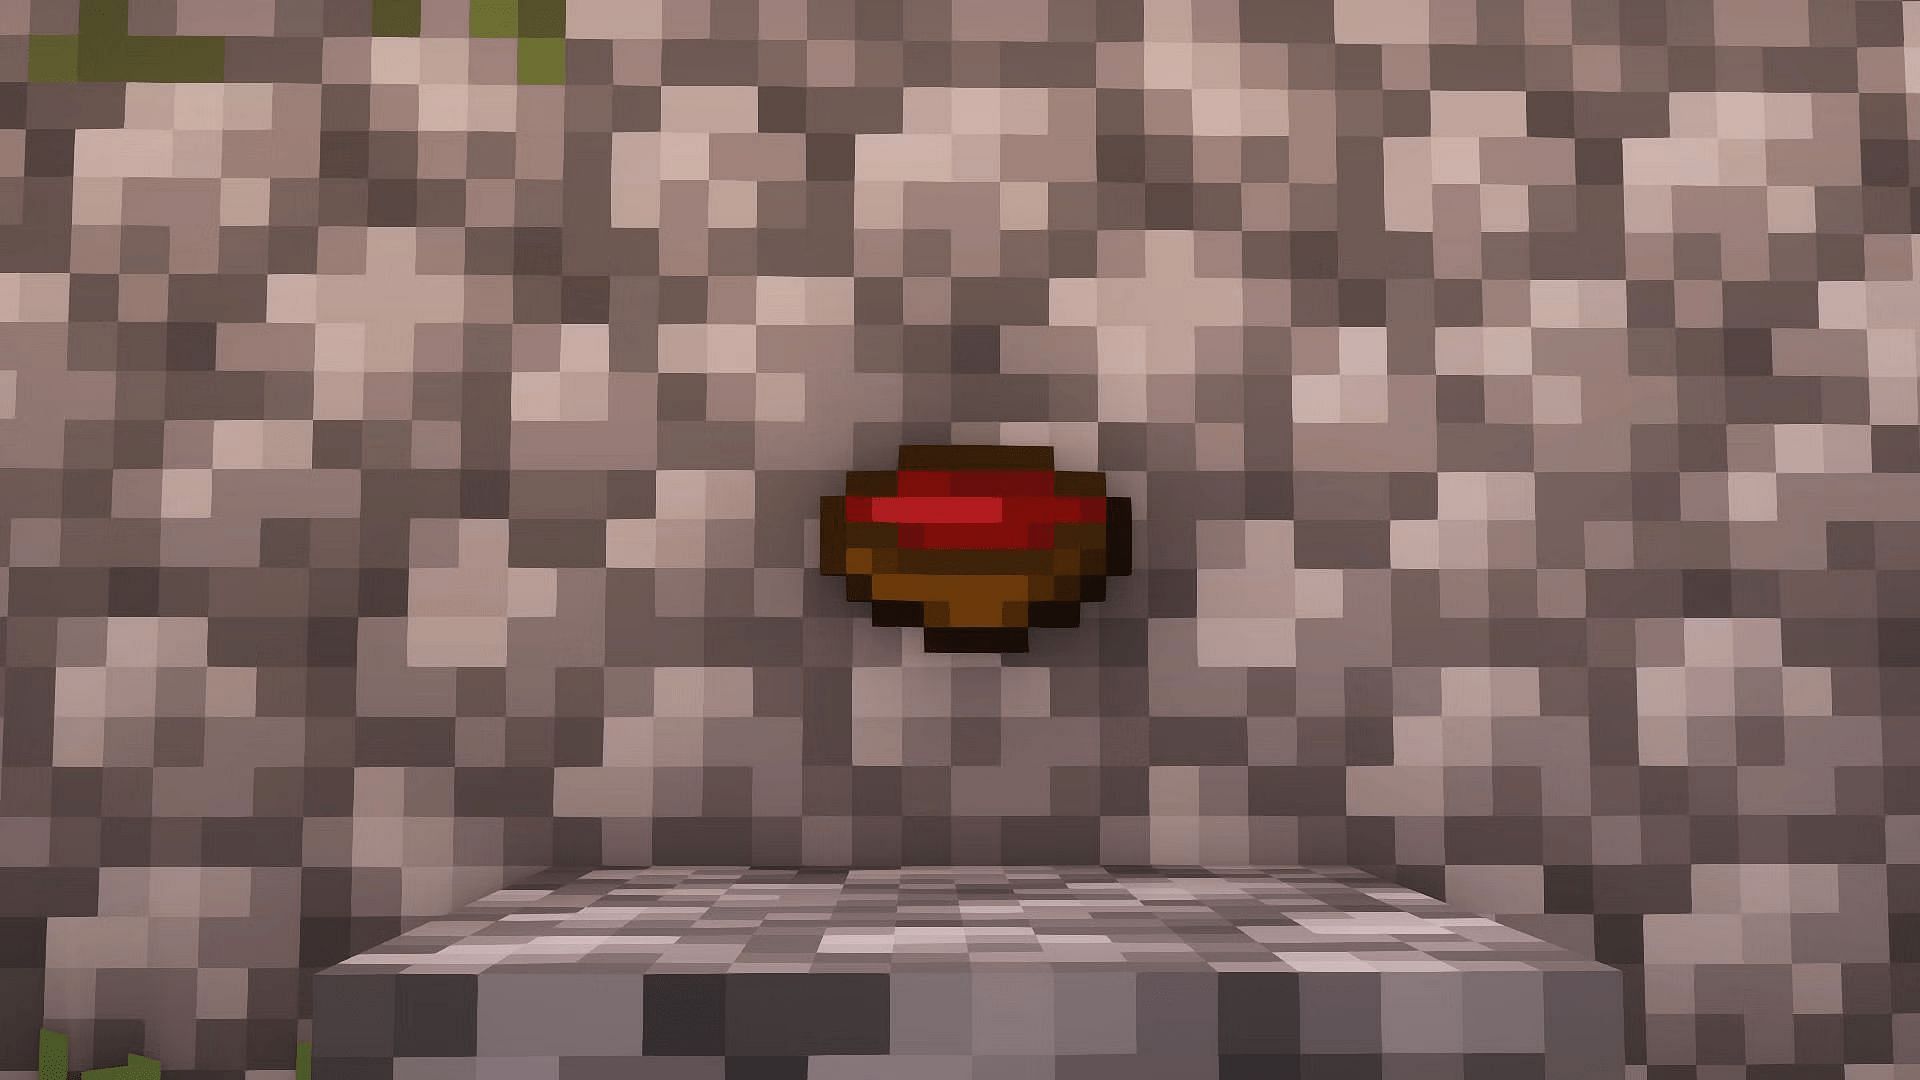 Beetroots and the soup they create are typically brushed off by Minecraft players (Image via Mojang)